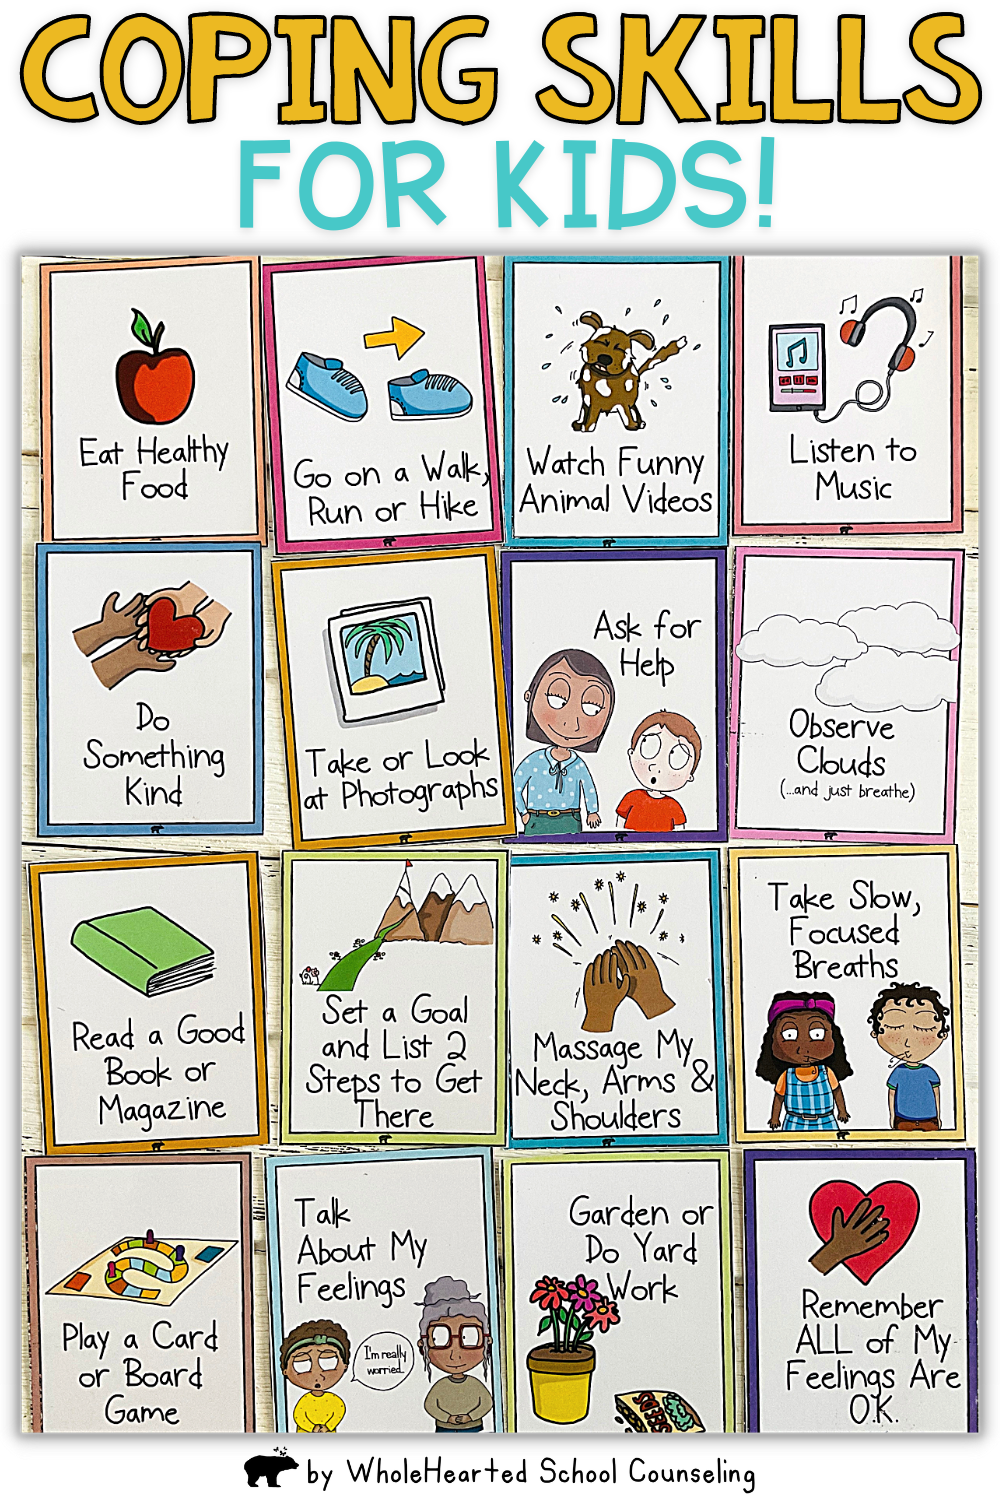 Coping Skills for Kids task cards.